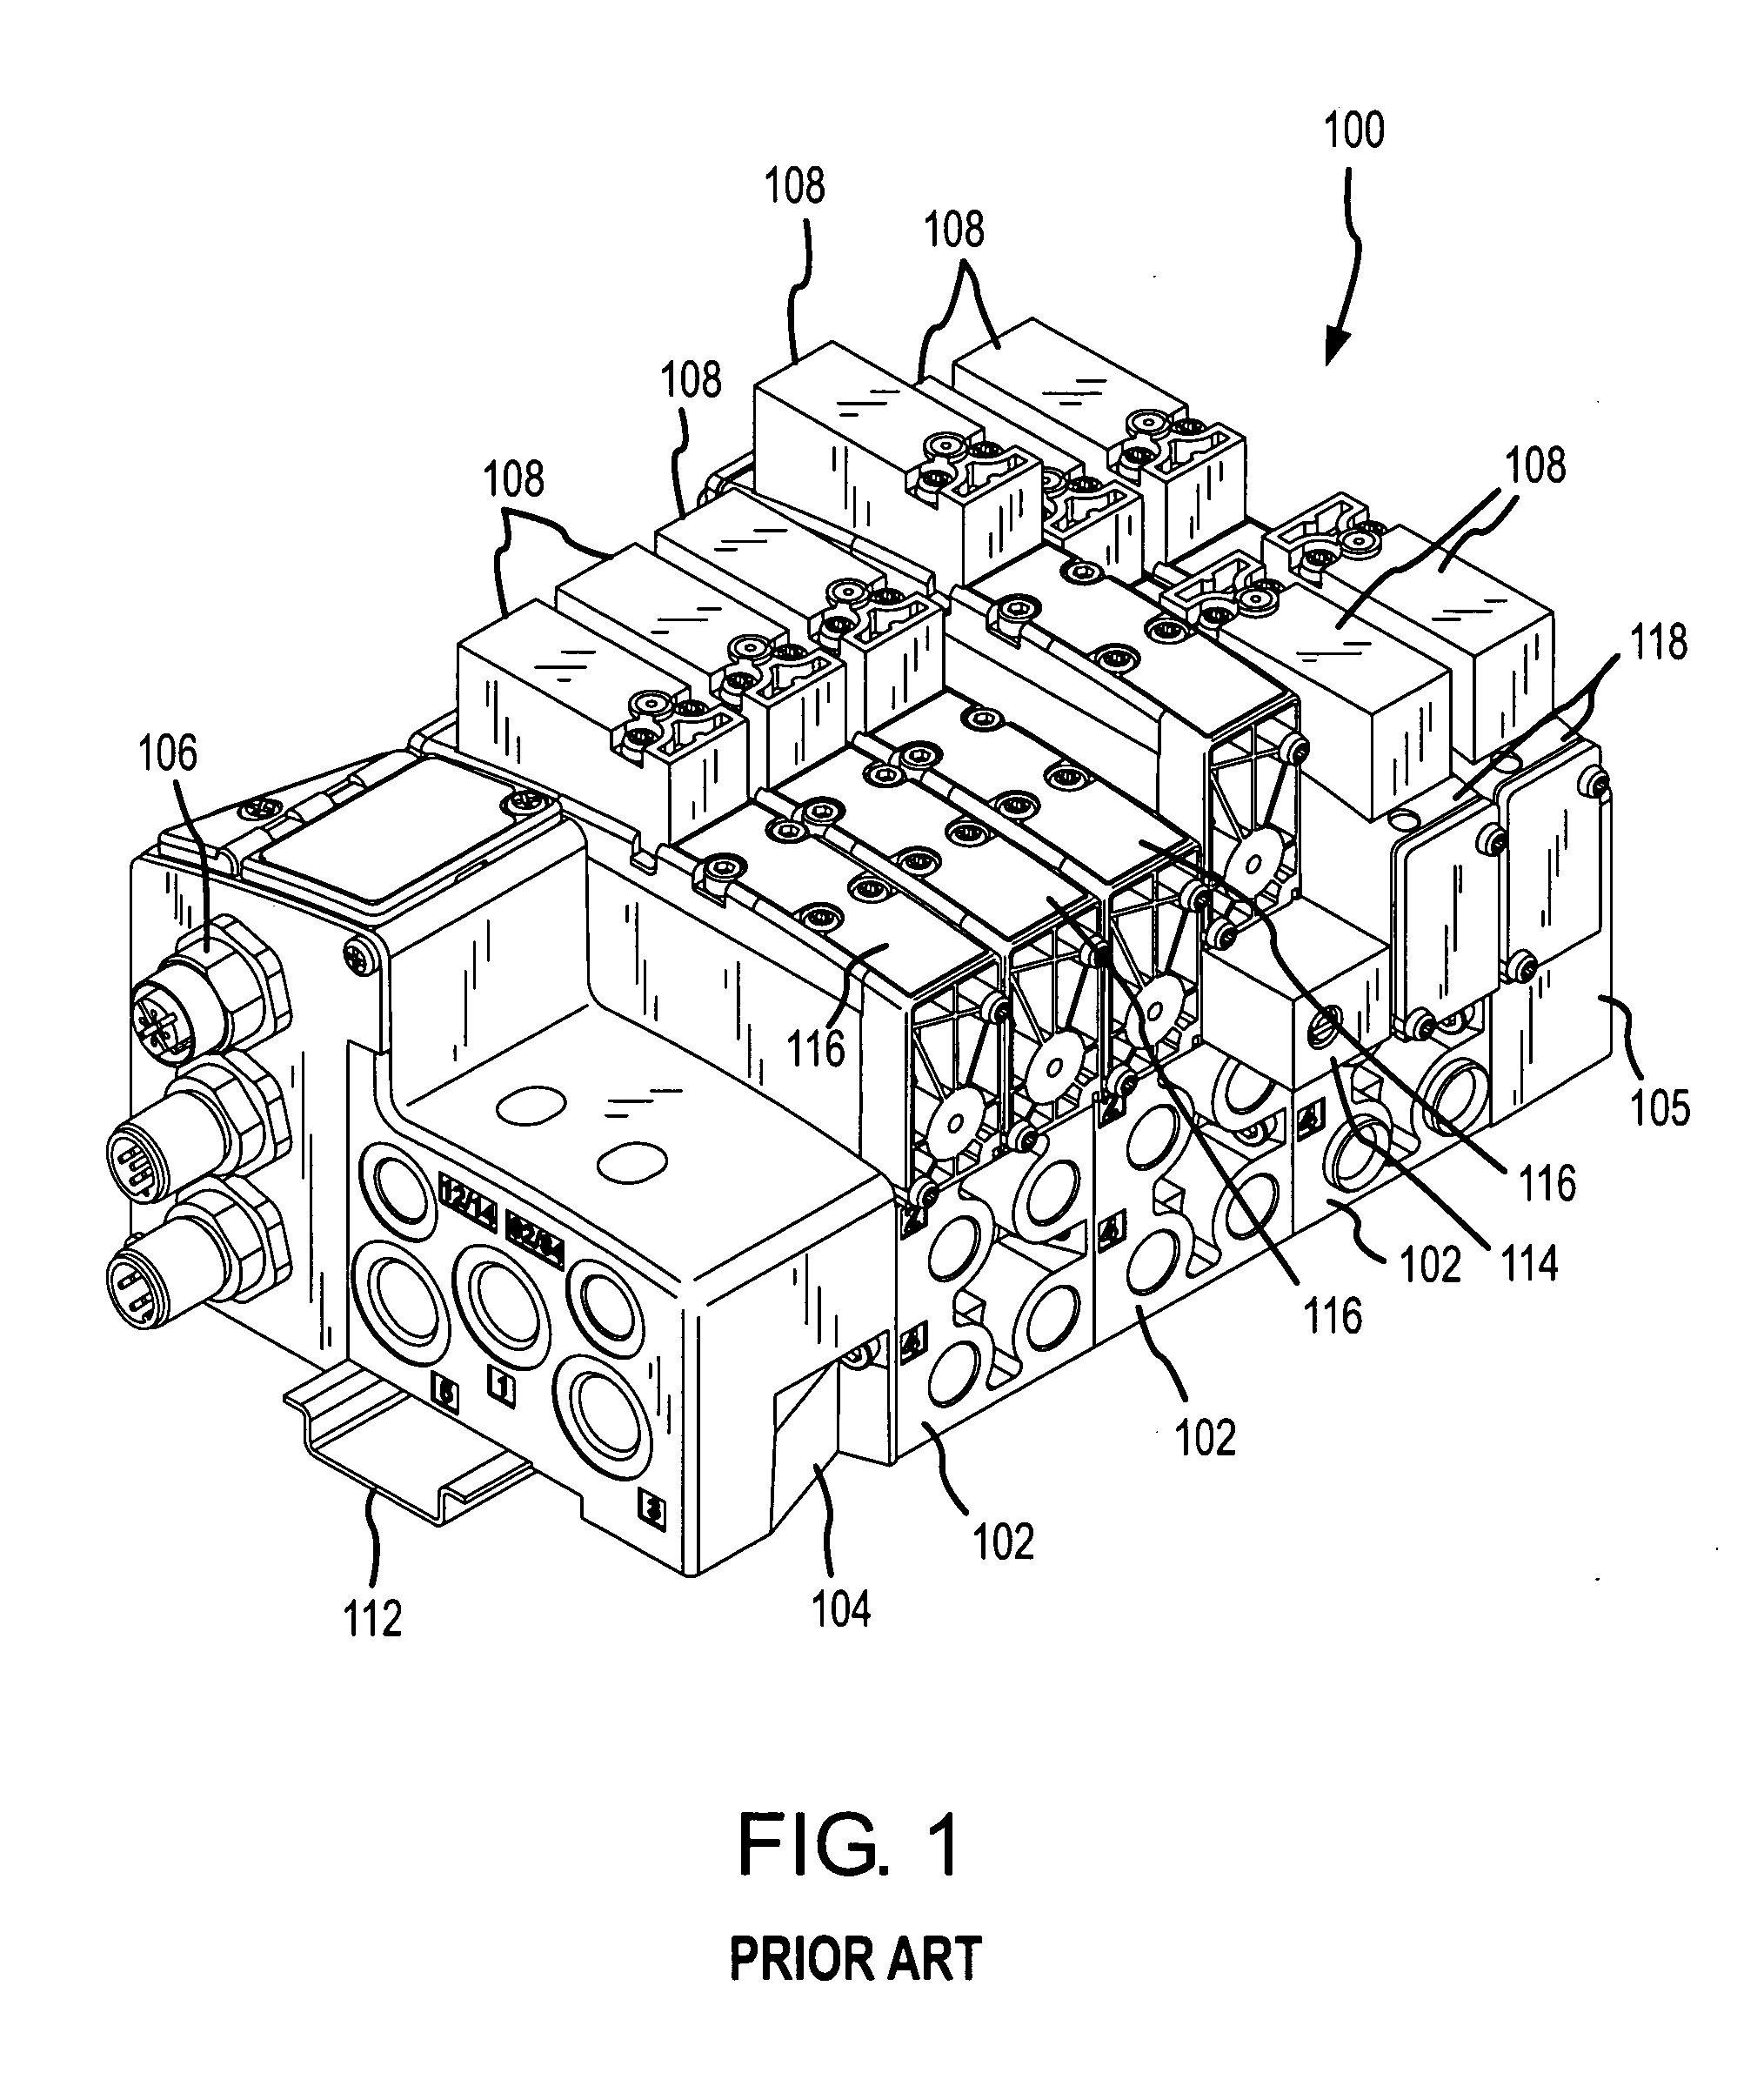 Valve with a rotated solenoid